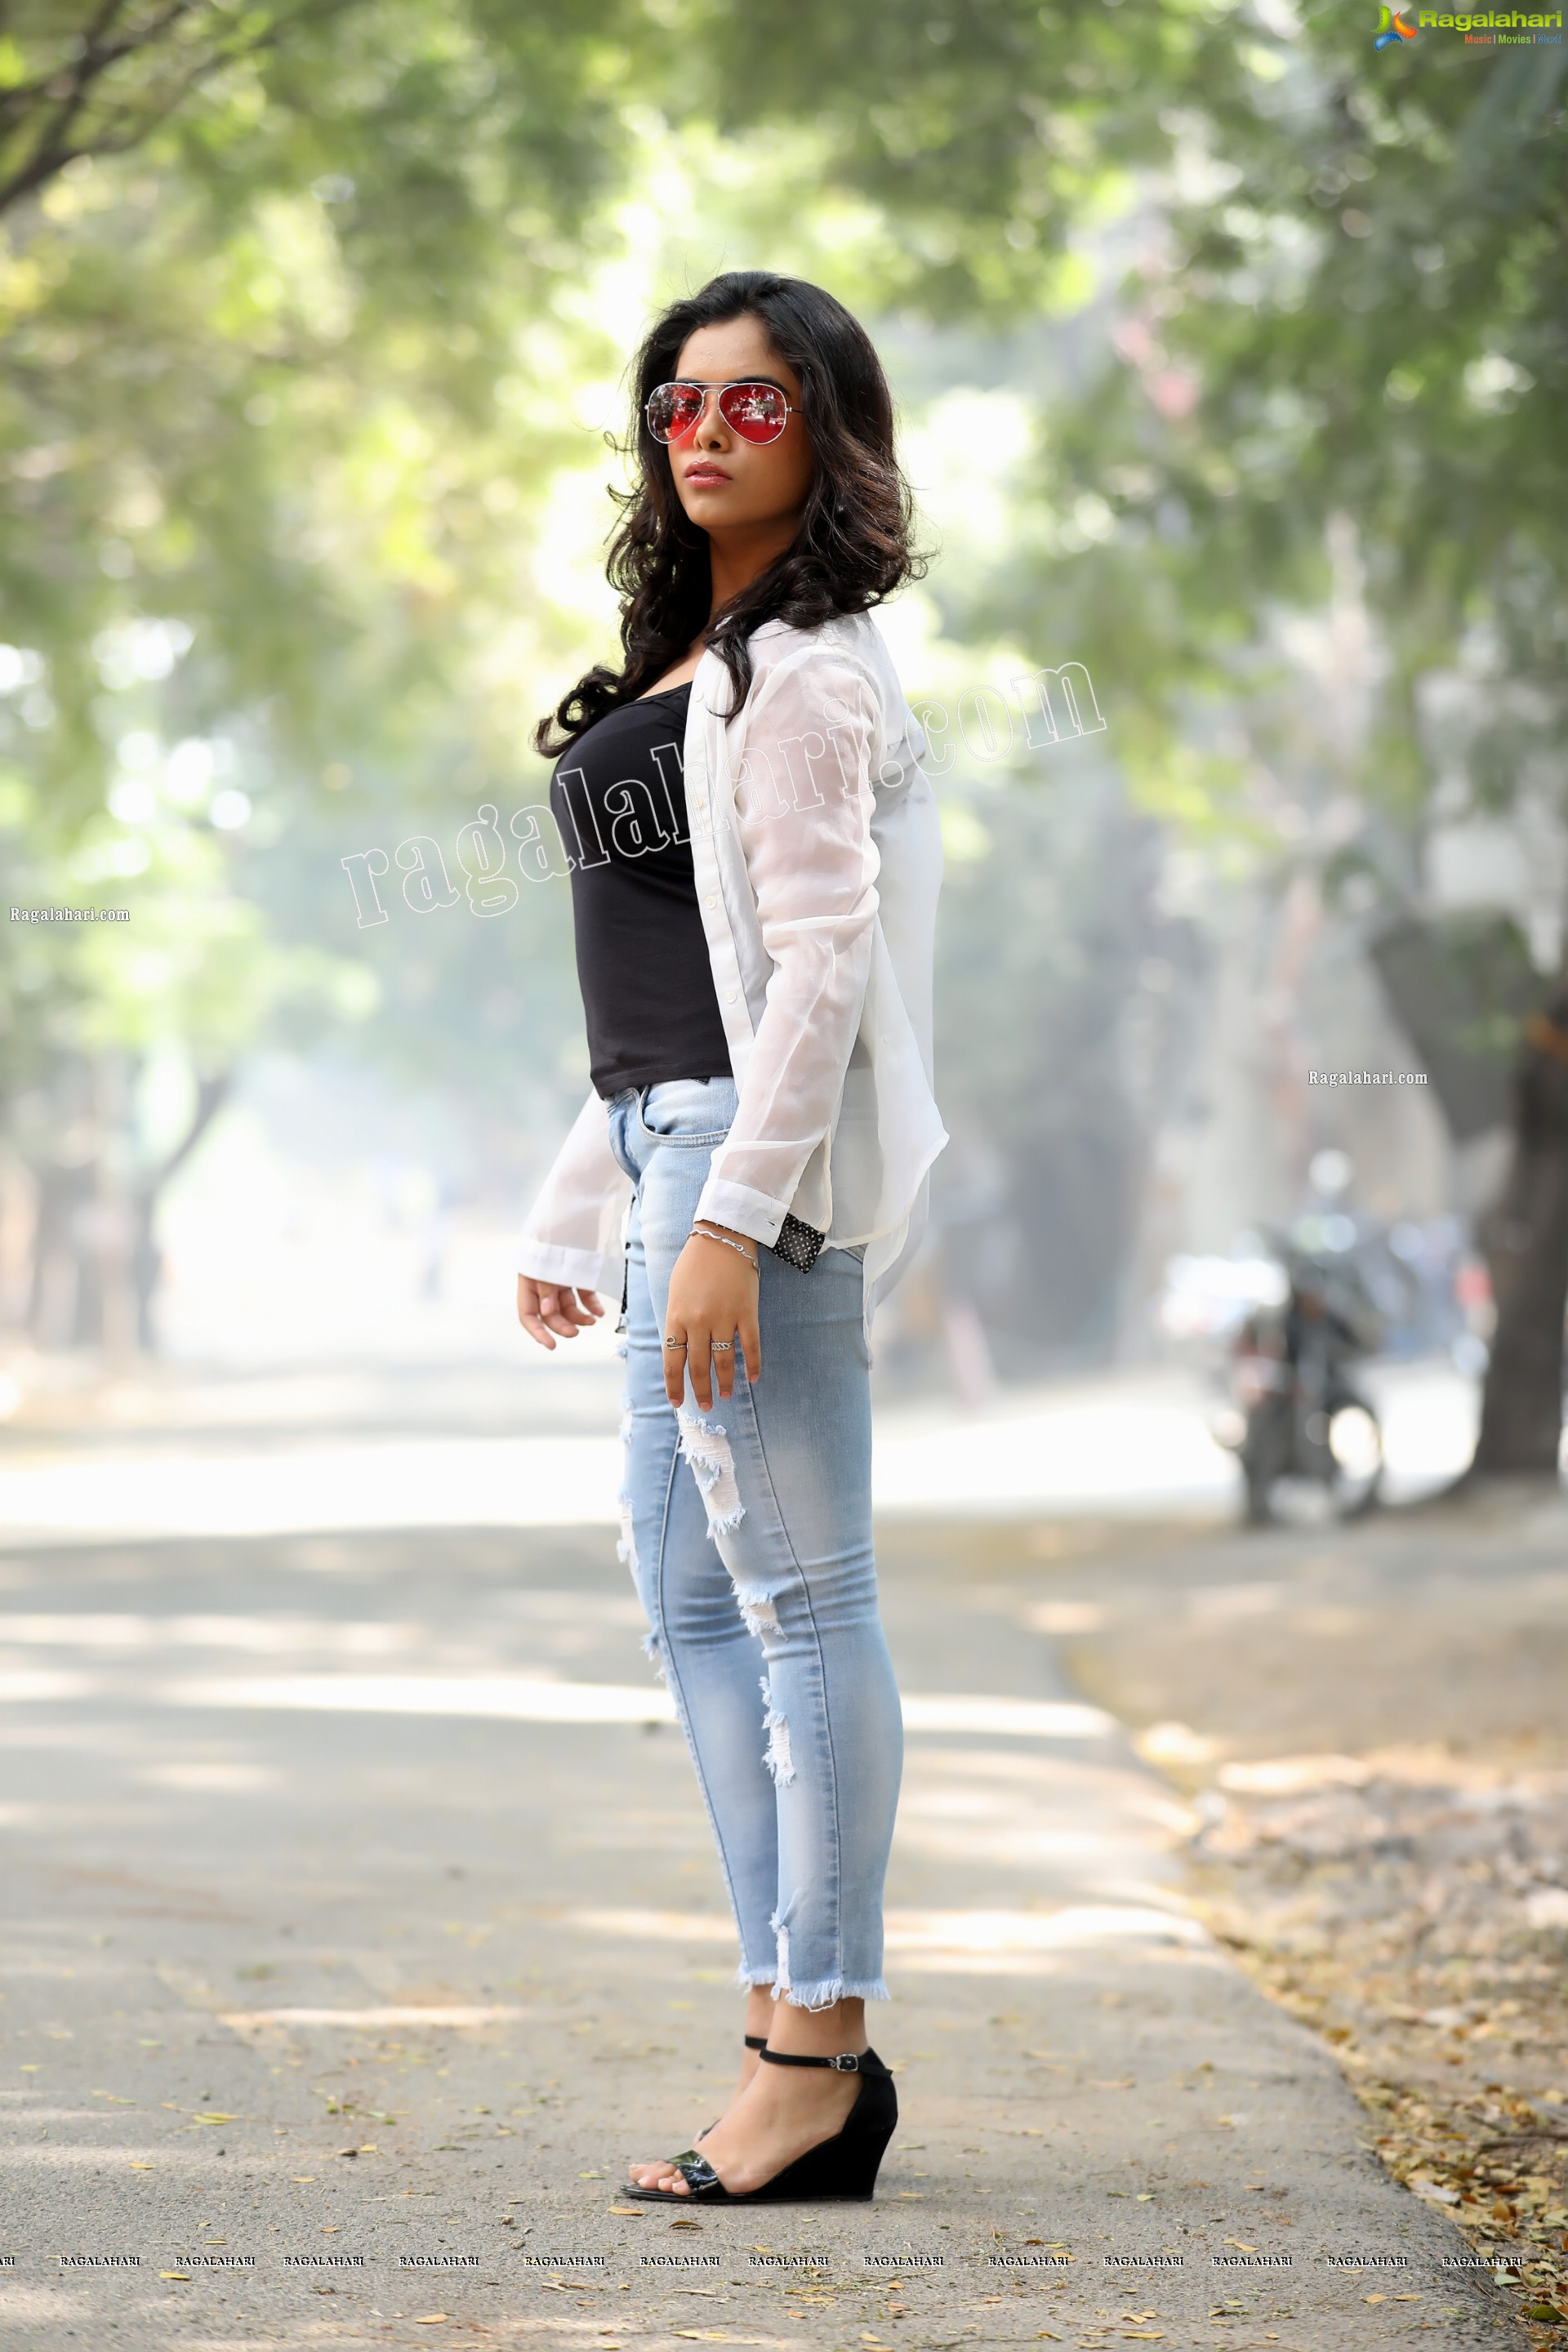 Sameera Reddy G in Black Cami and Jeans Exclusive Photo Shoot